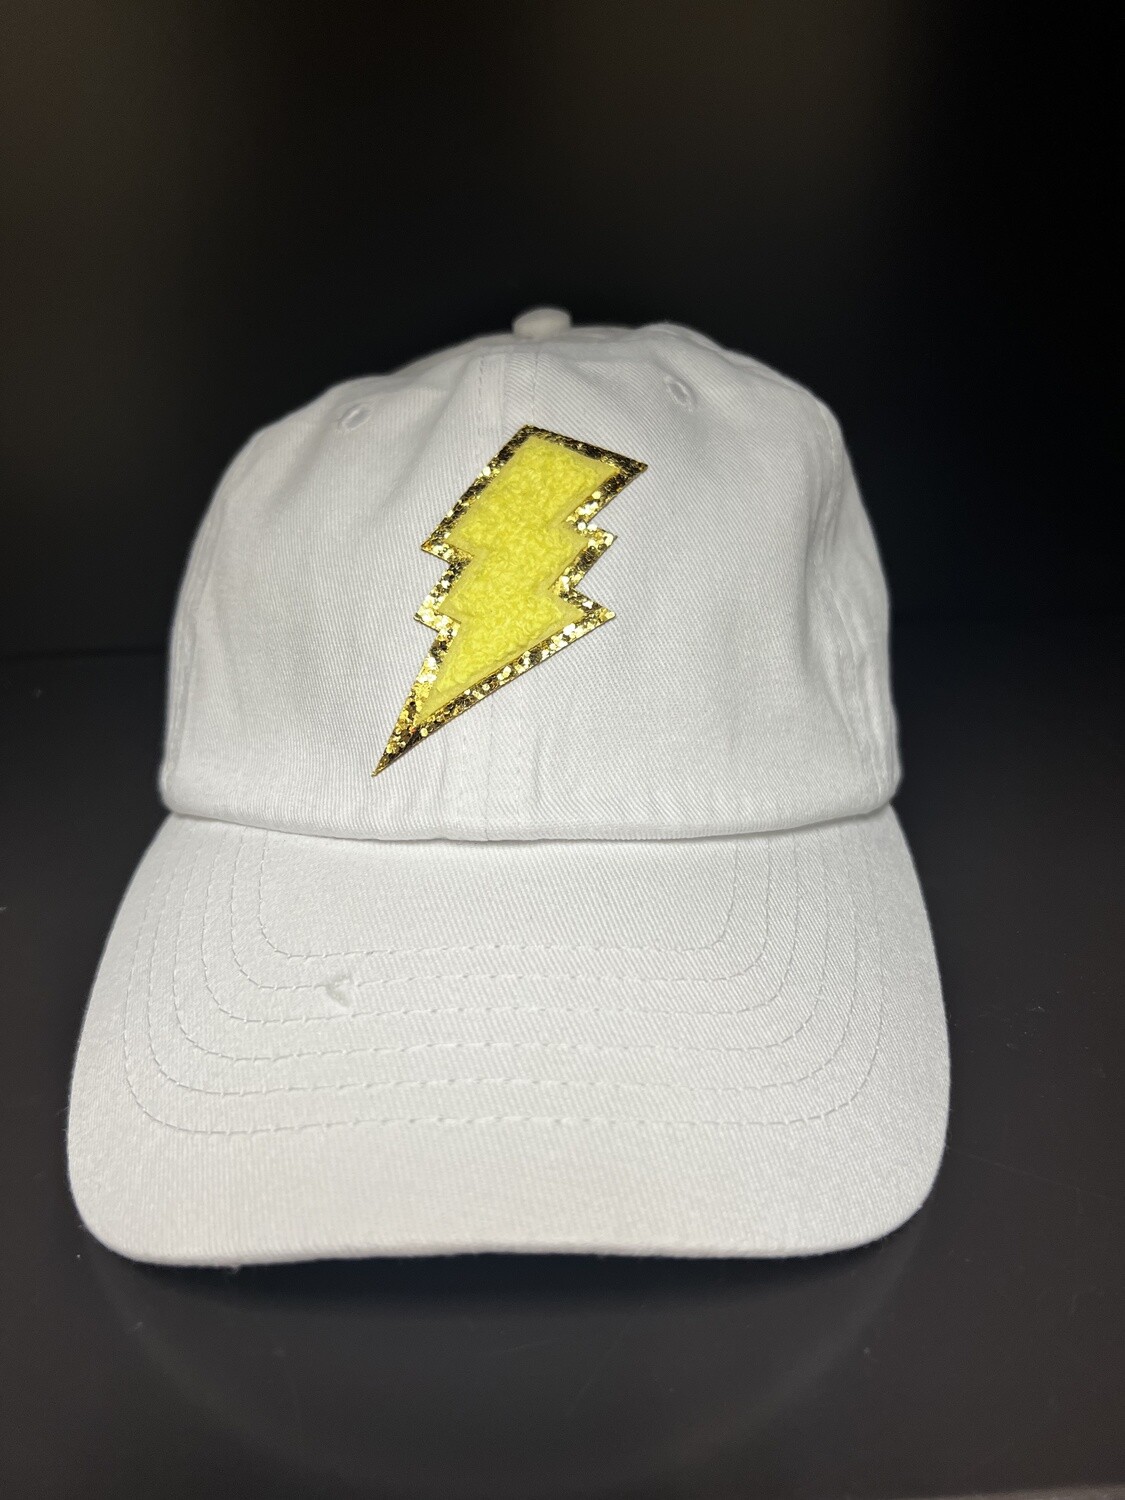 Yellow Lightning Bolt Patch on White Cap